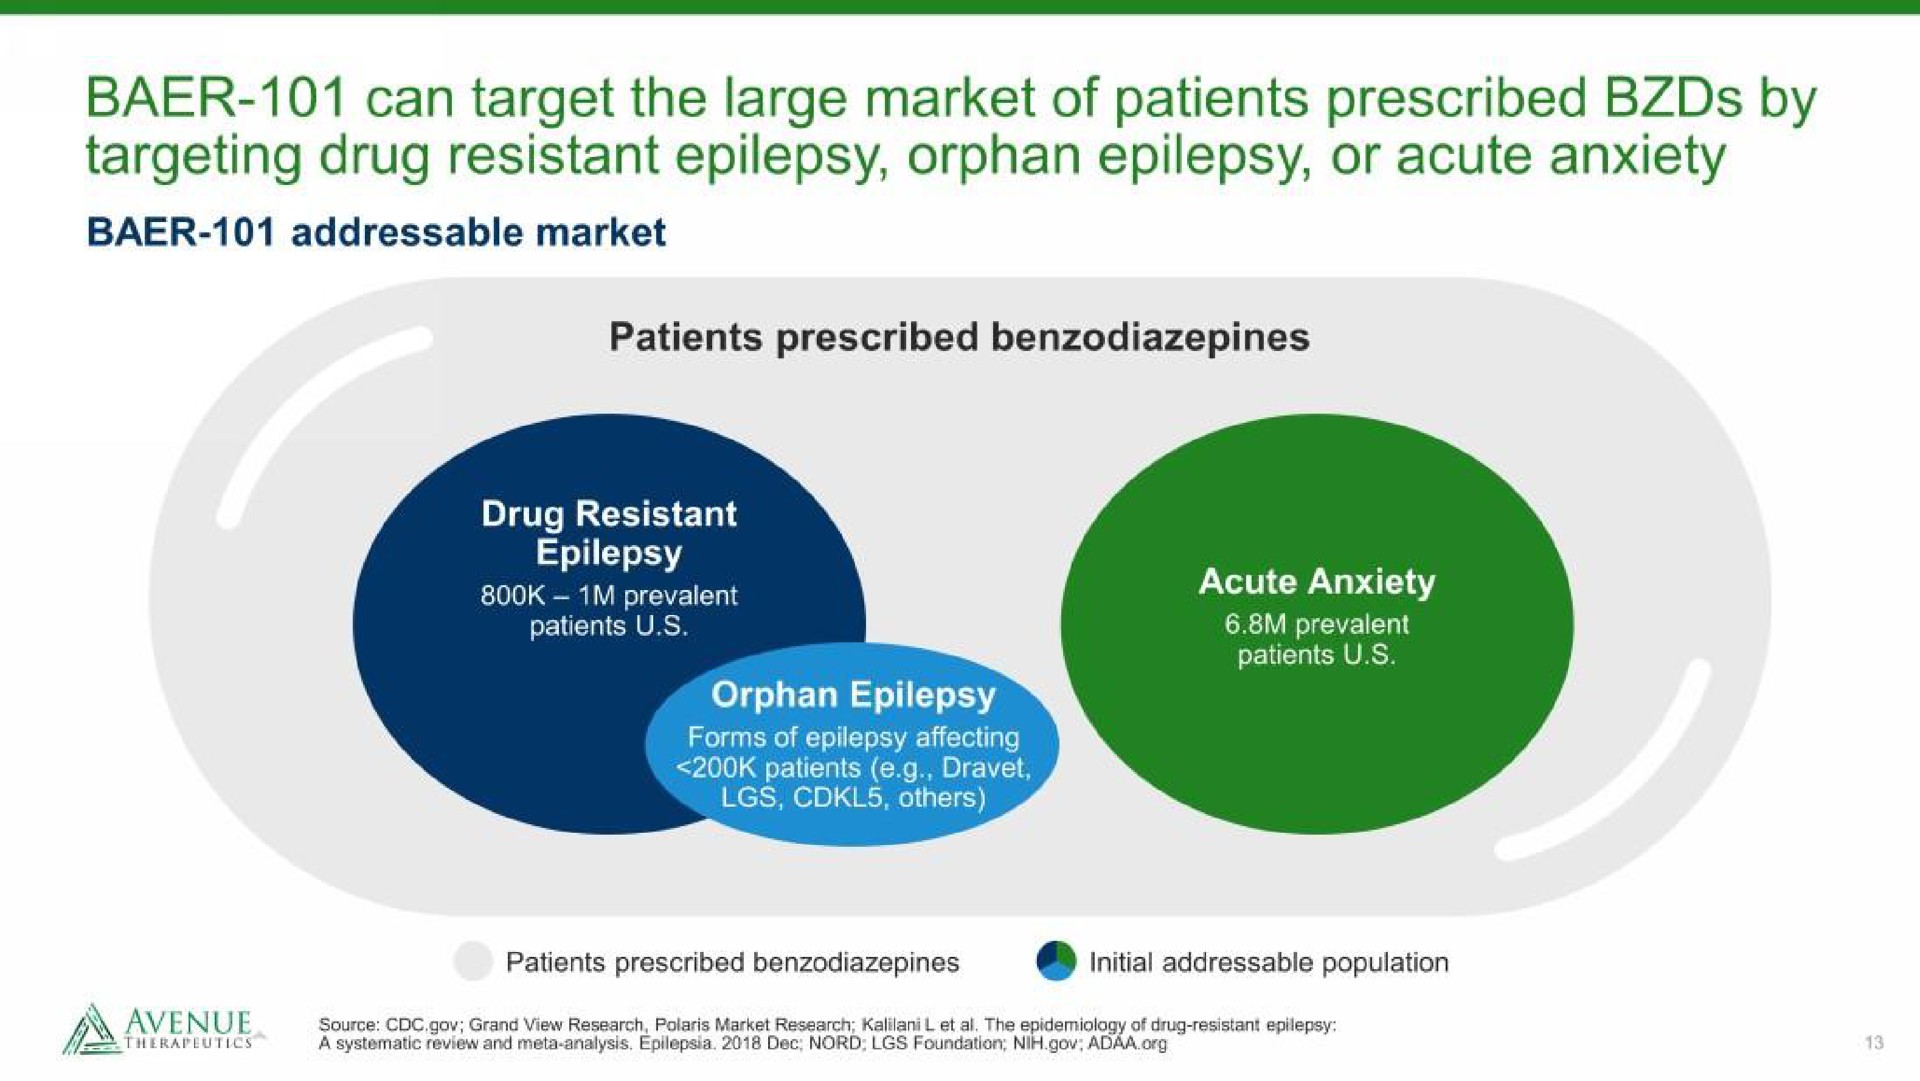 can target the large market of patients prescribed by targeting drug resistant epilepsy orphan epilepsy or acute anxiety | Avenue Therapeutics